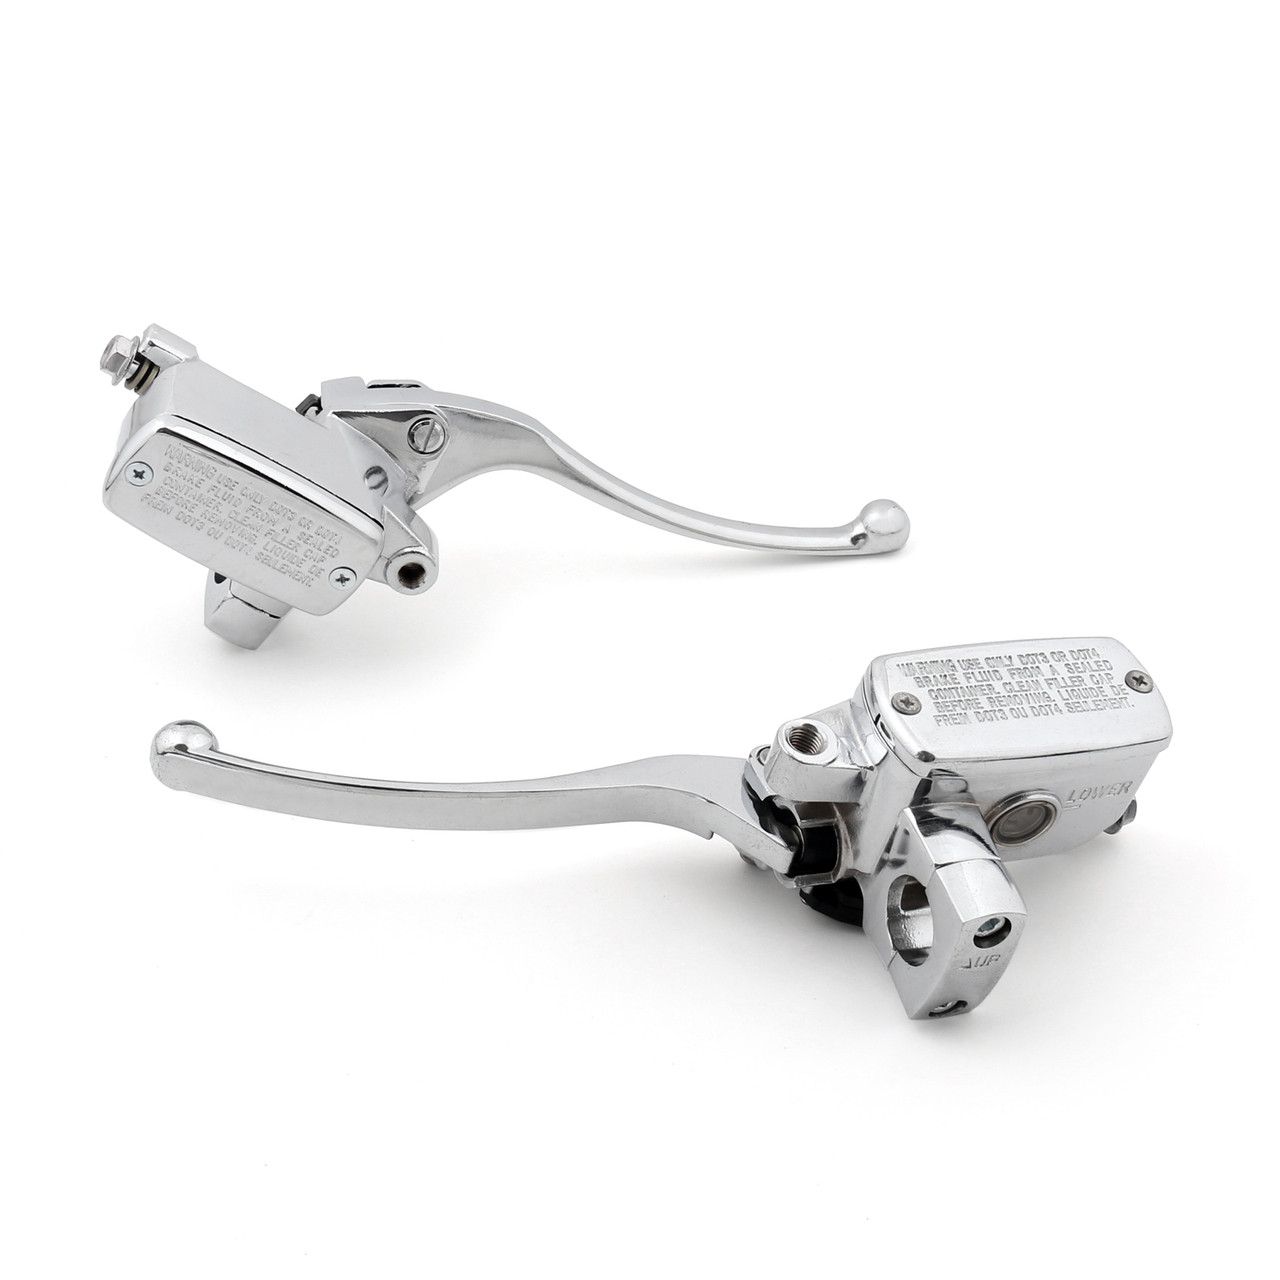 http://www.madhornets.store/AMZ/MotoPart/BrakeClutchLevers/M542-A034/M542-A034-Chrome-1.jpg